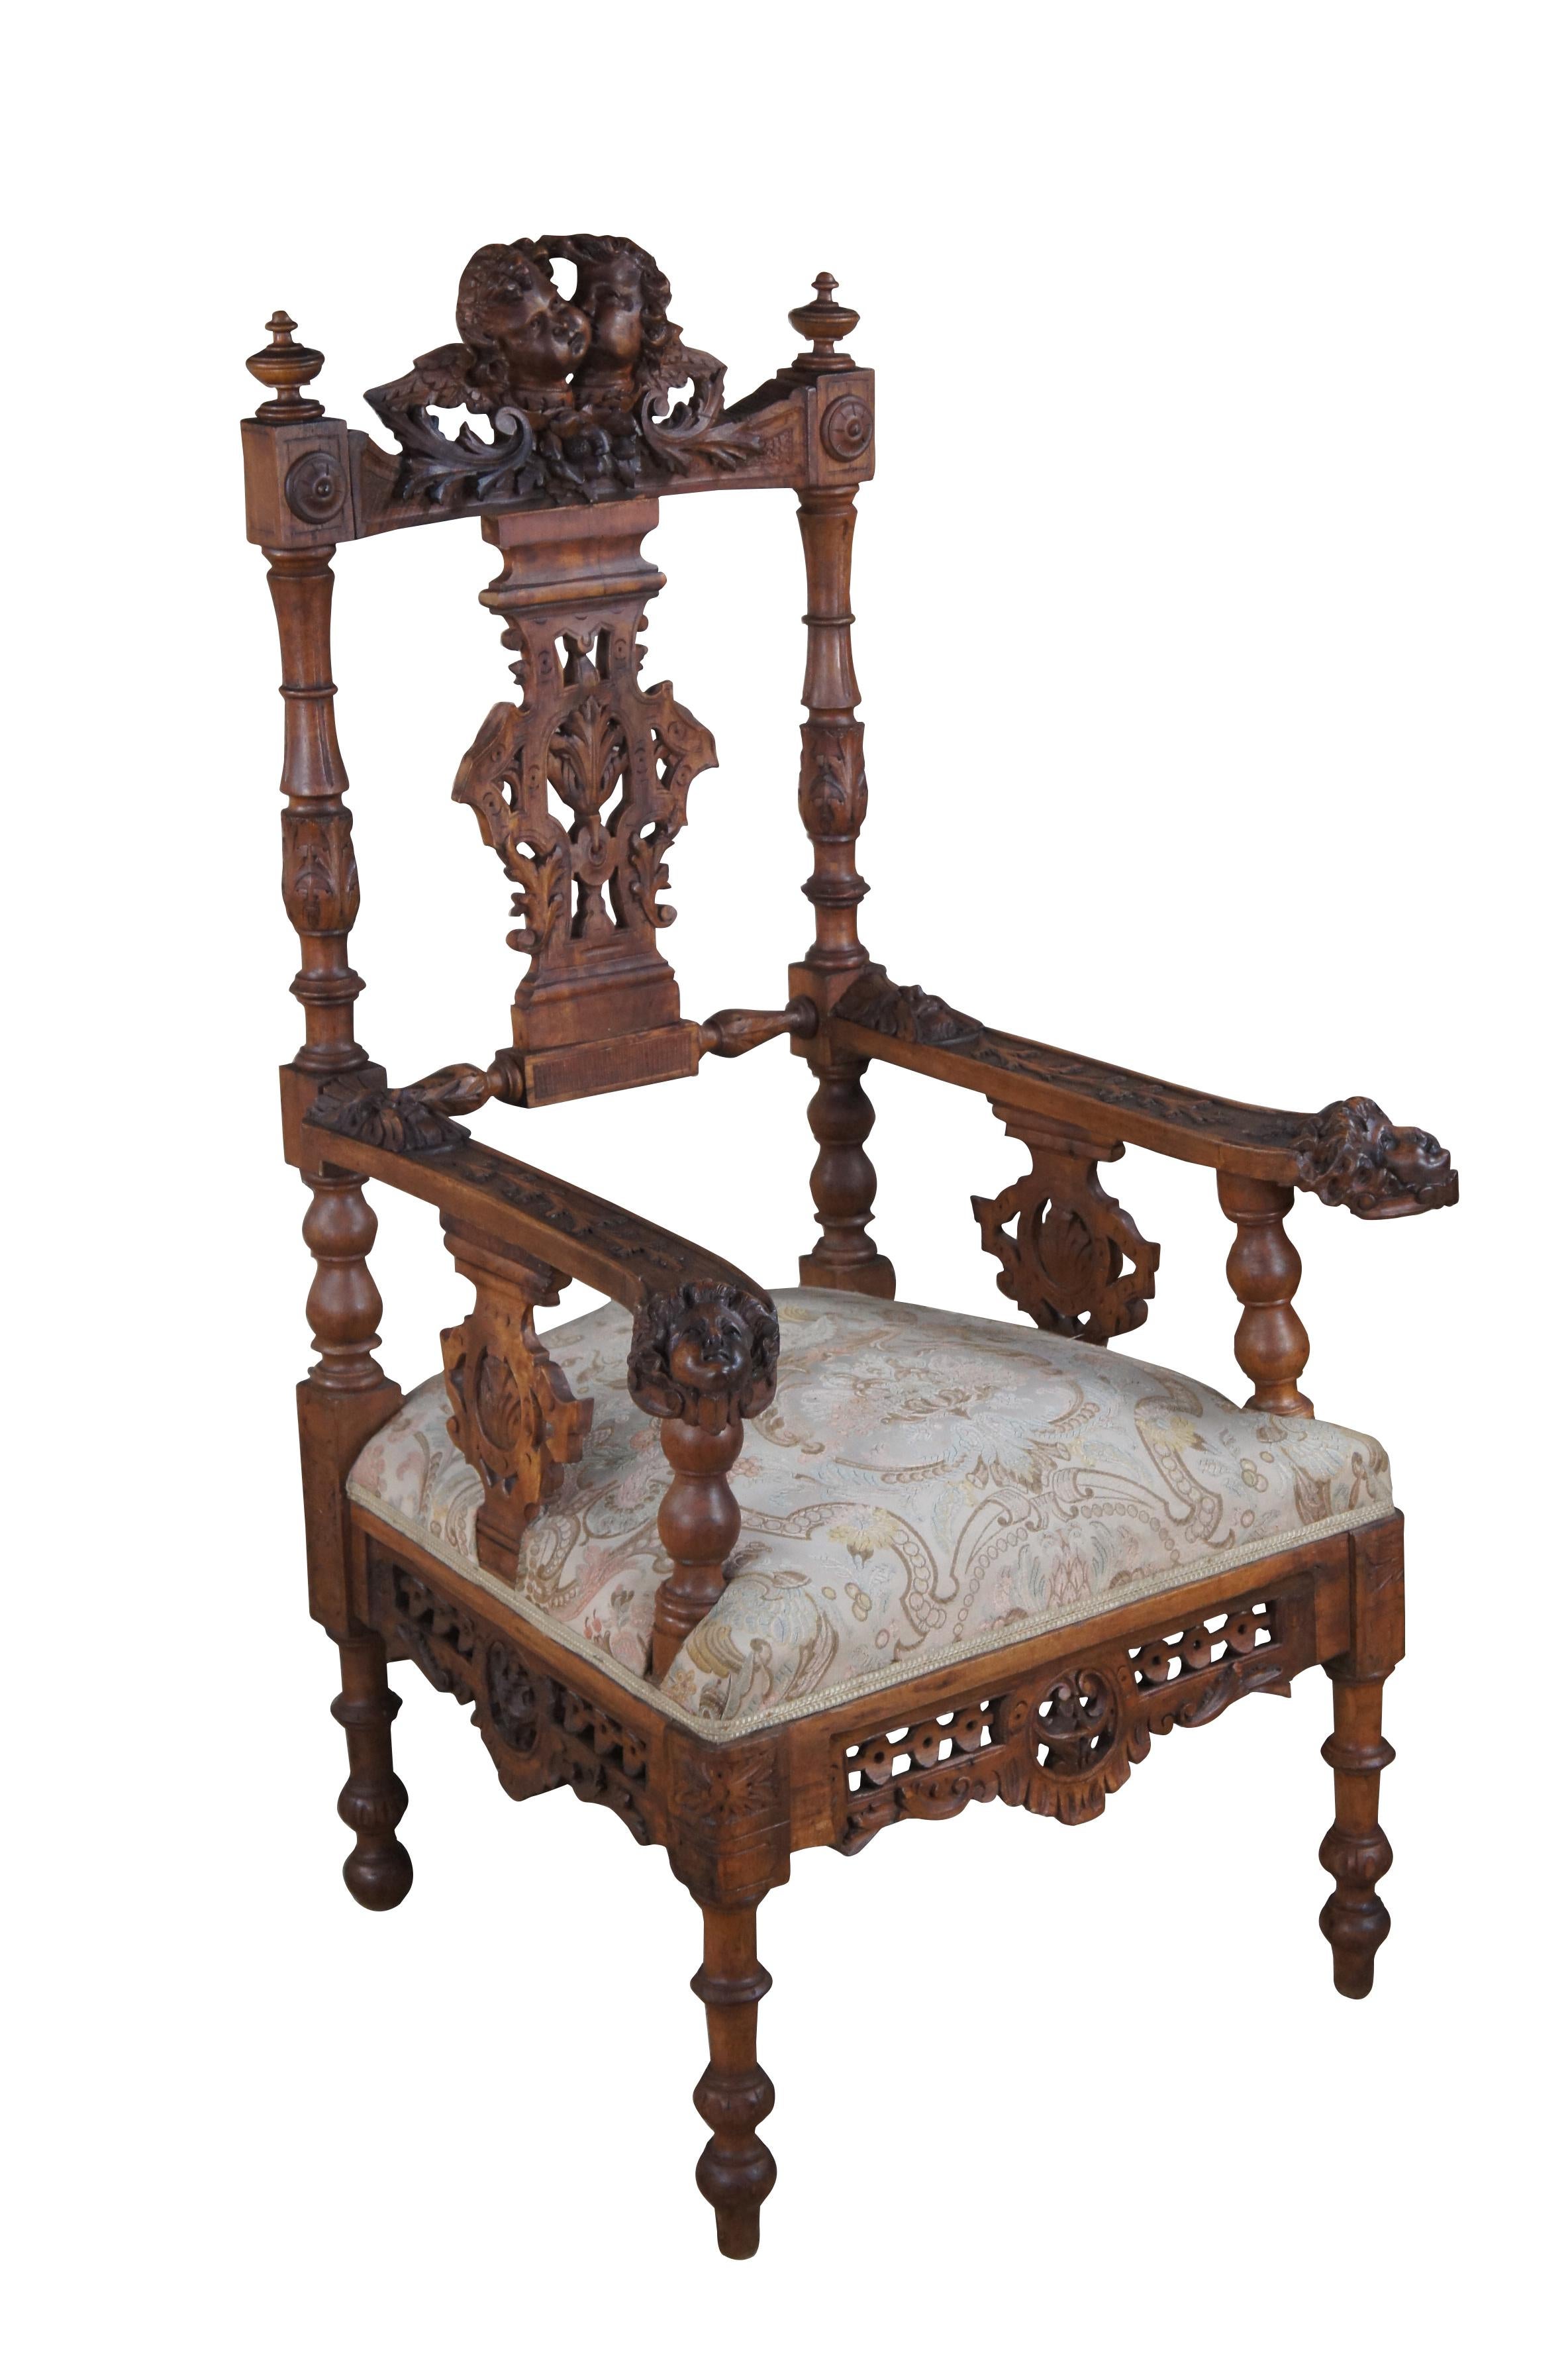 2 Antique 19th C Italian Renaissance Carved Walnut Putti Cherub Angel Arm Chairs In Good Condition For Sale In Dayton, OH